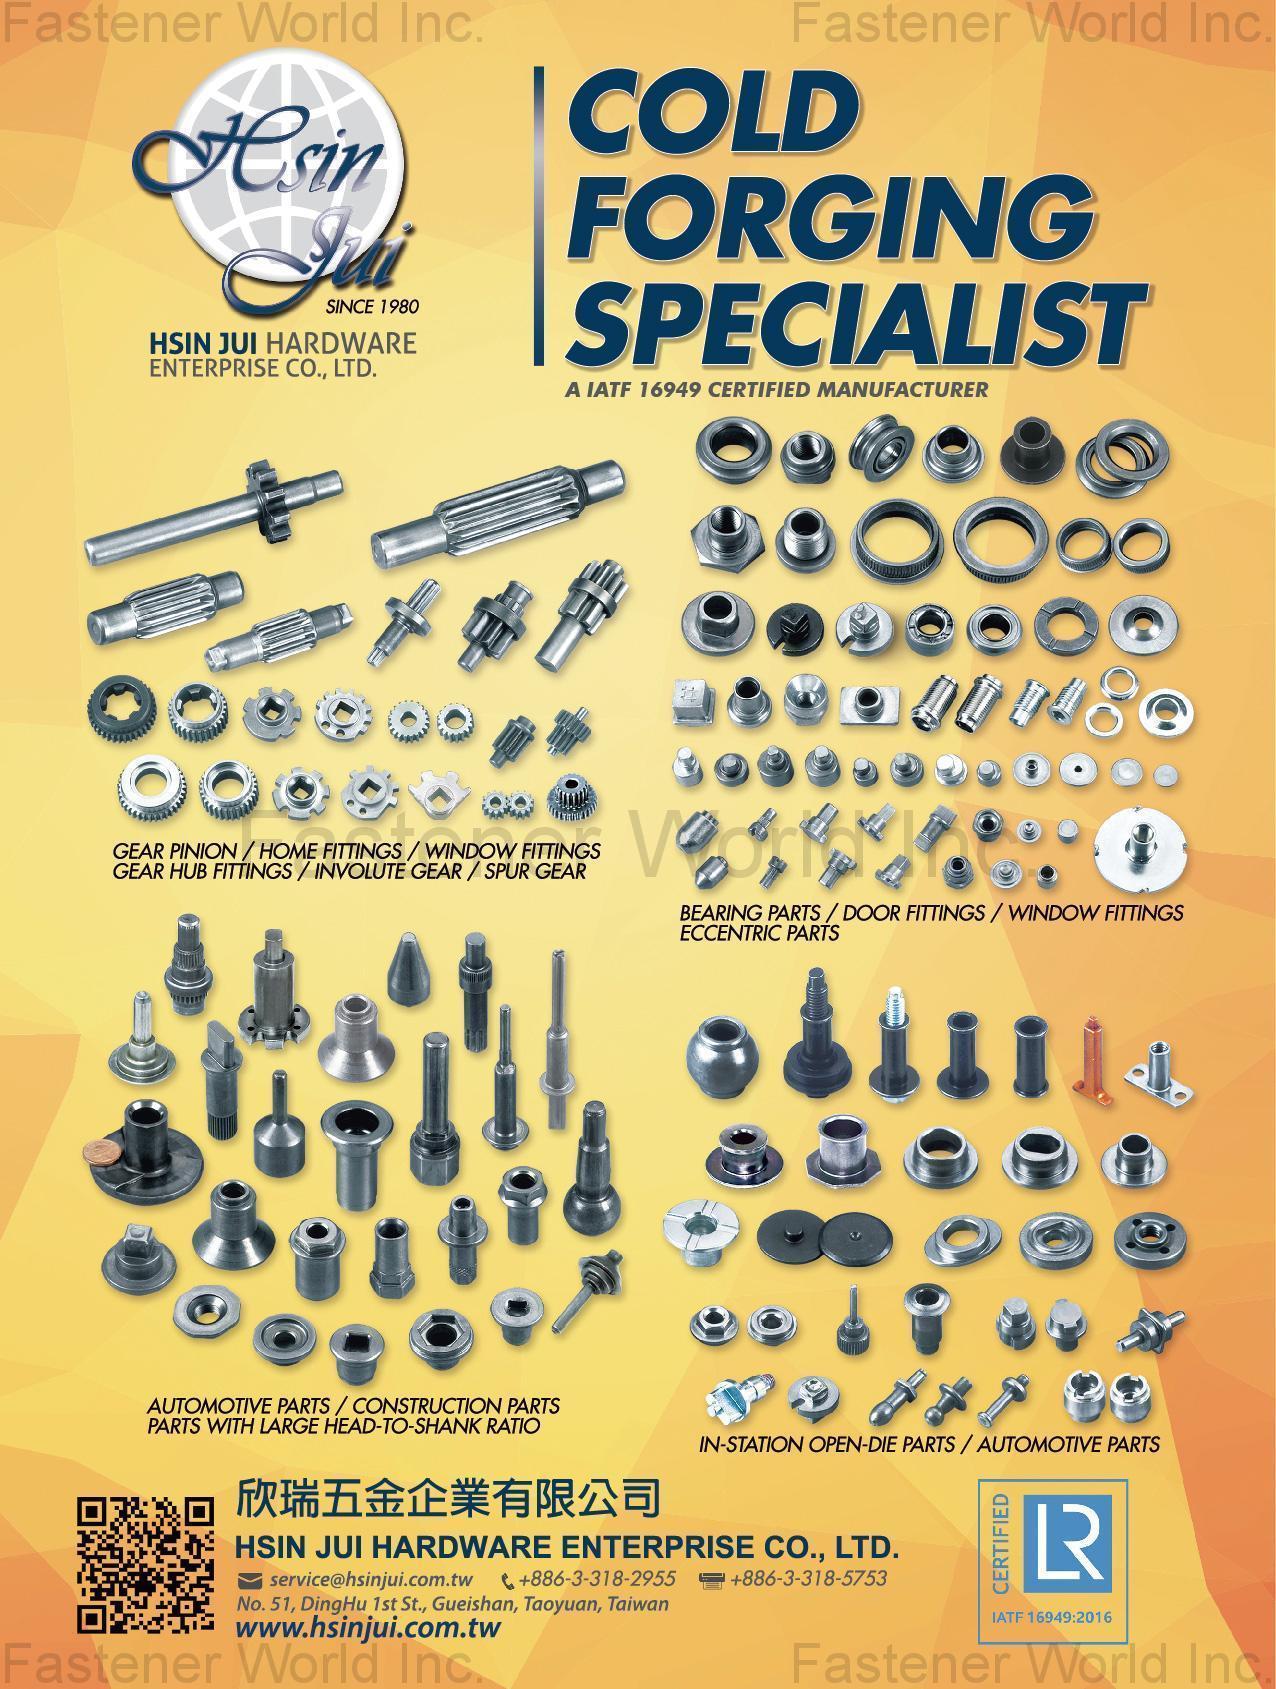 HSIN JUI HARDWARE ENTERPRISE CO., LTD.  , Gear Pinion, Home Fittings, Window Fittings, Gear Hub Fittings, Involute Gear, Spur Gear, Bearing Parts, Door Fittings, Eccentric Parts, Automotive Parts, Construction Parts, Parts with Large Head-to-Shank Ratio, In-Station Open-Die Parts